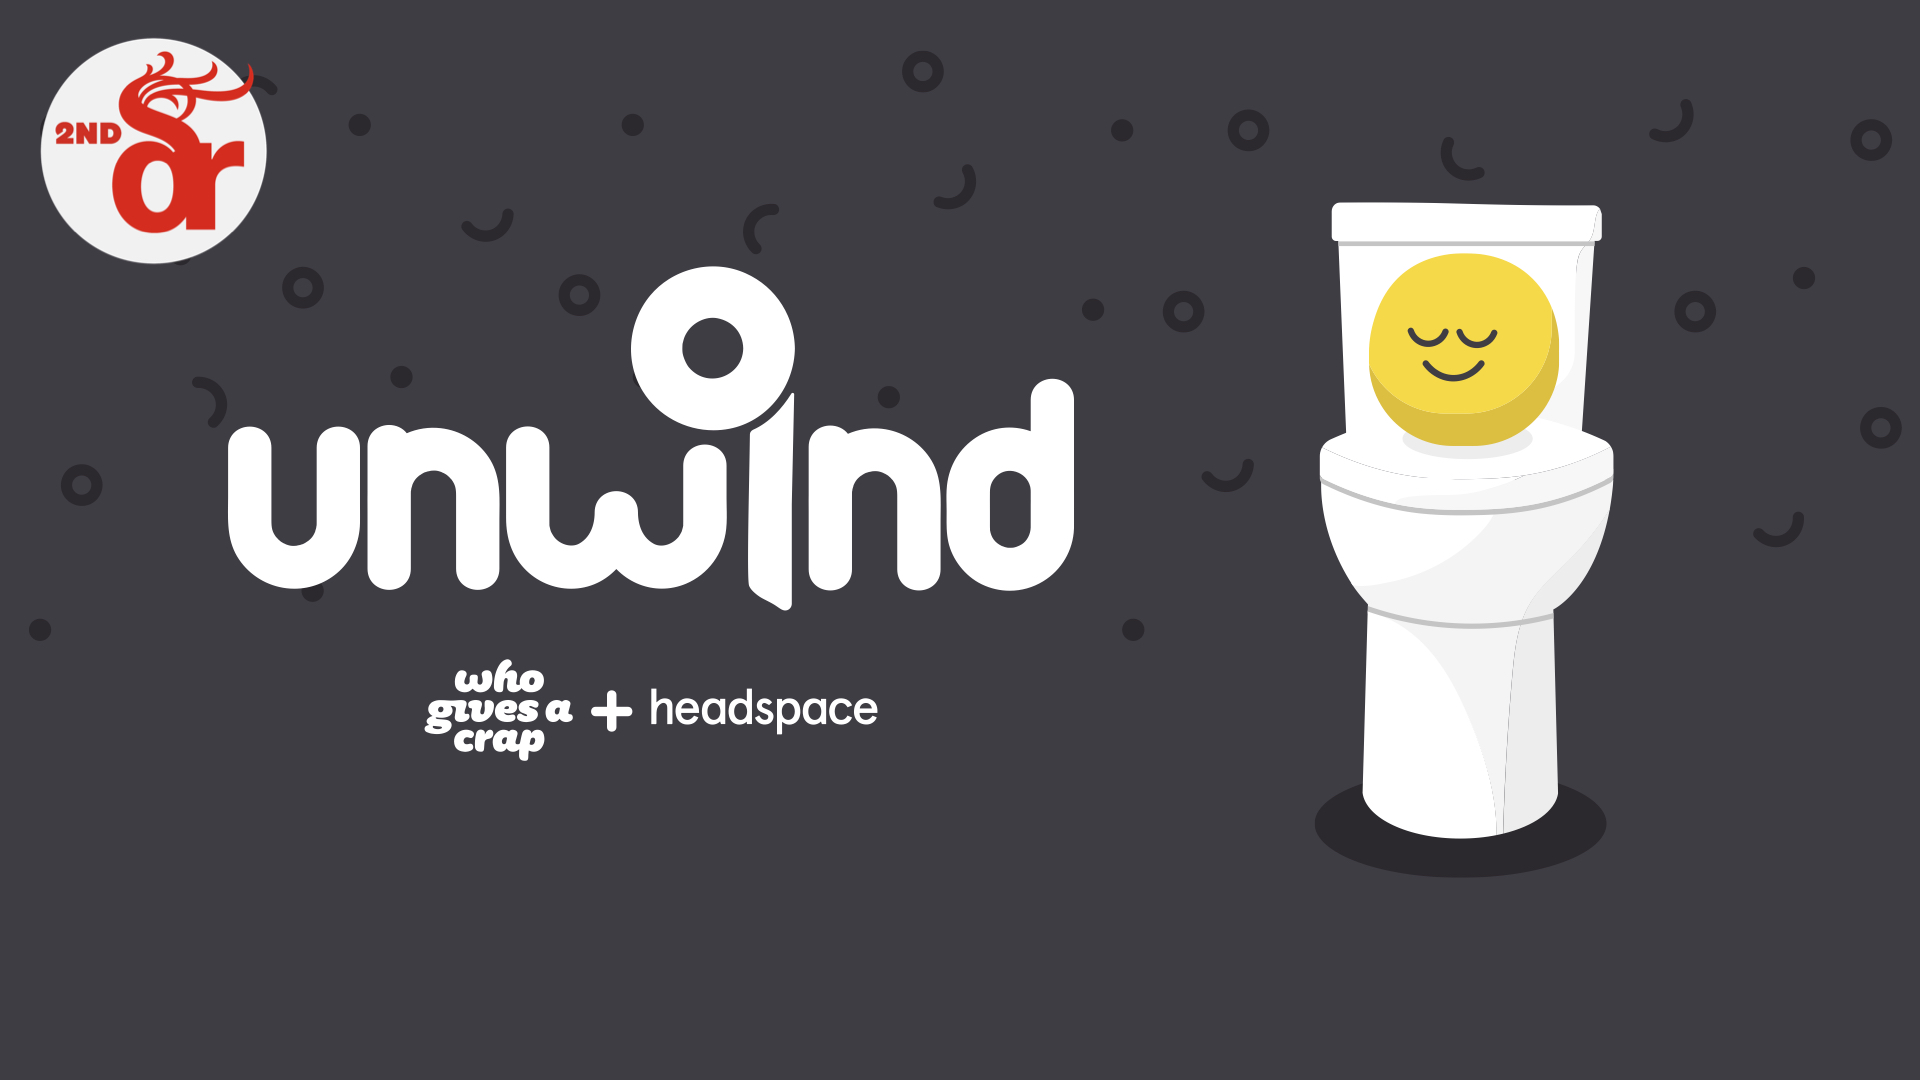 A Campaign Identity and strategy project designed by Emma Watts urging men to try meditation in the bathroom. Thumbnaul shows smiley face on an illustration of a white toilet with the type 'unwind' to the left in white on a black background.